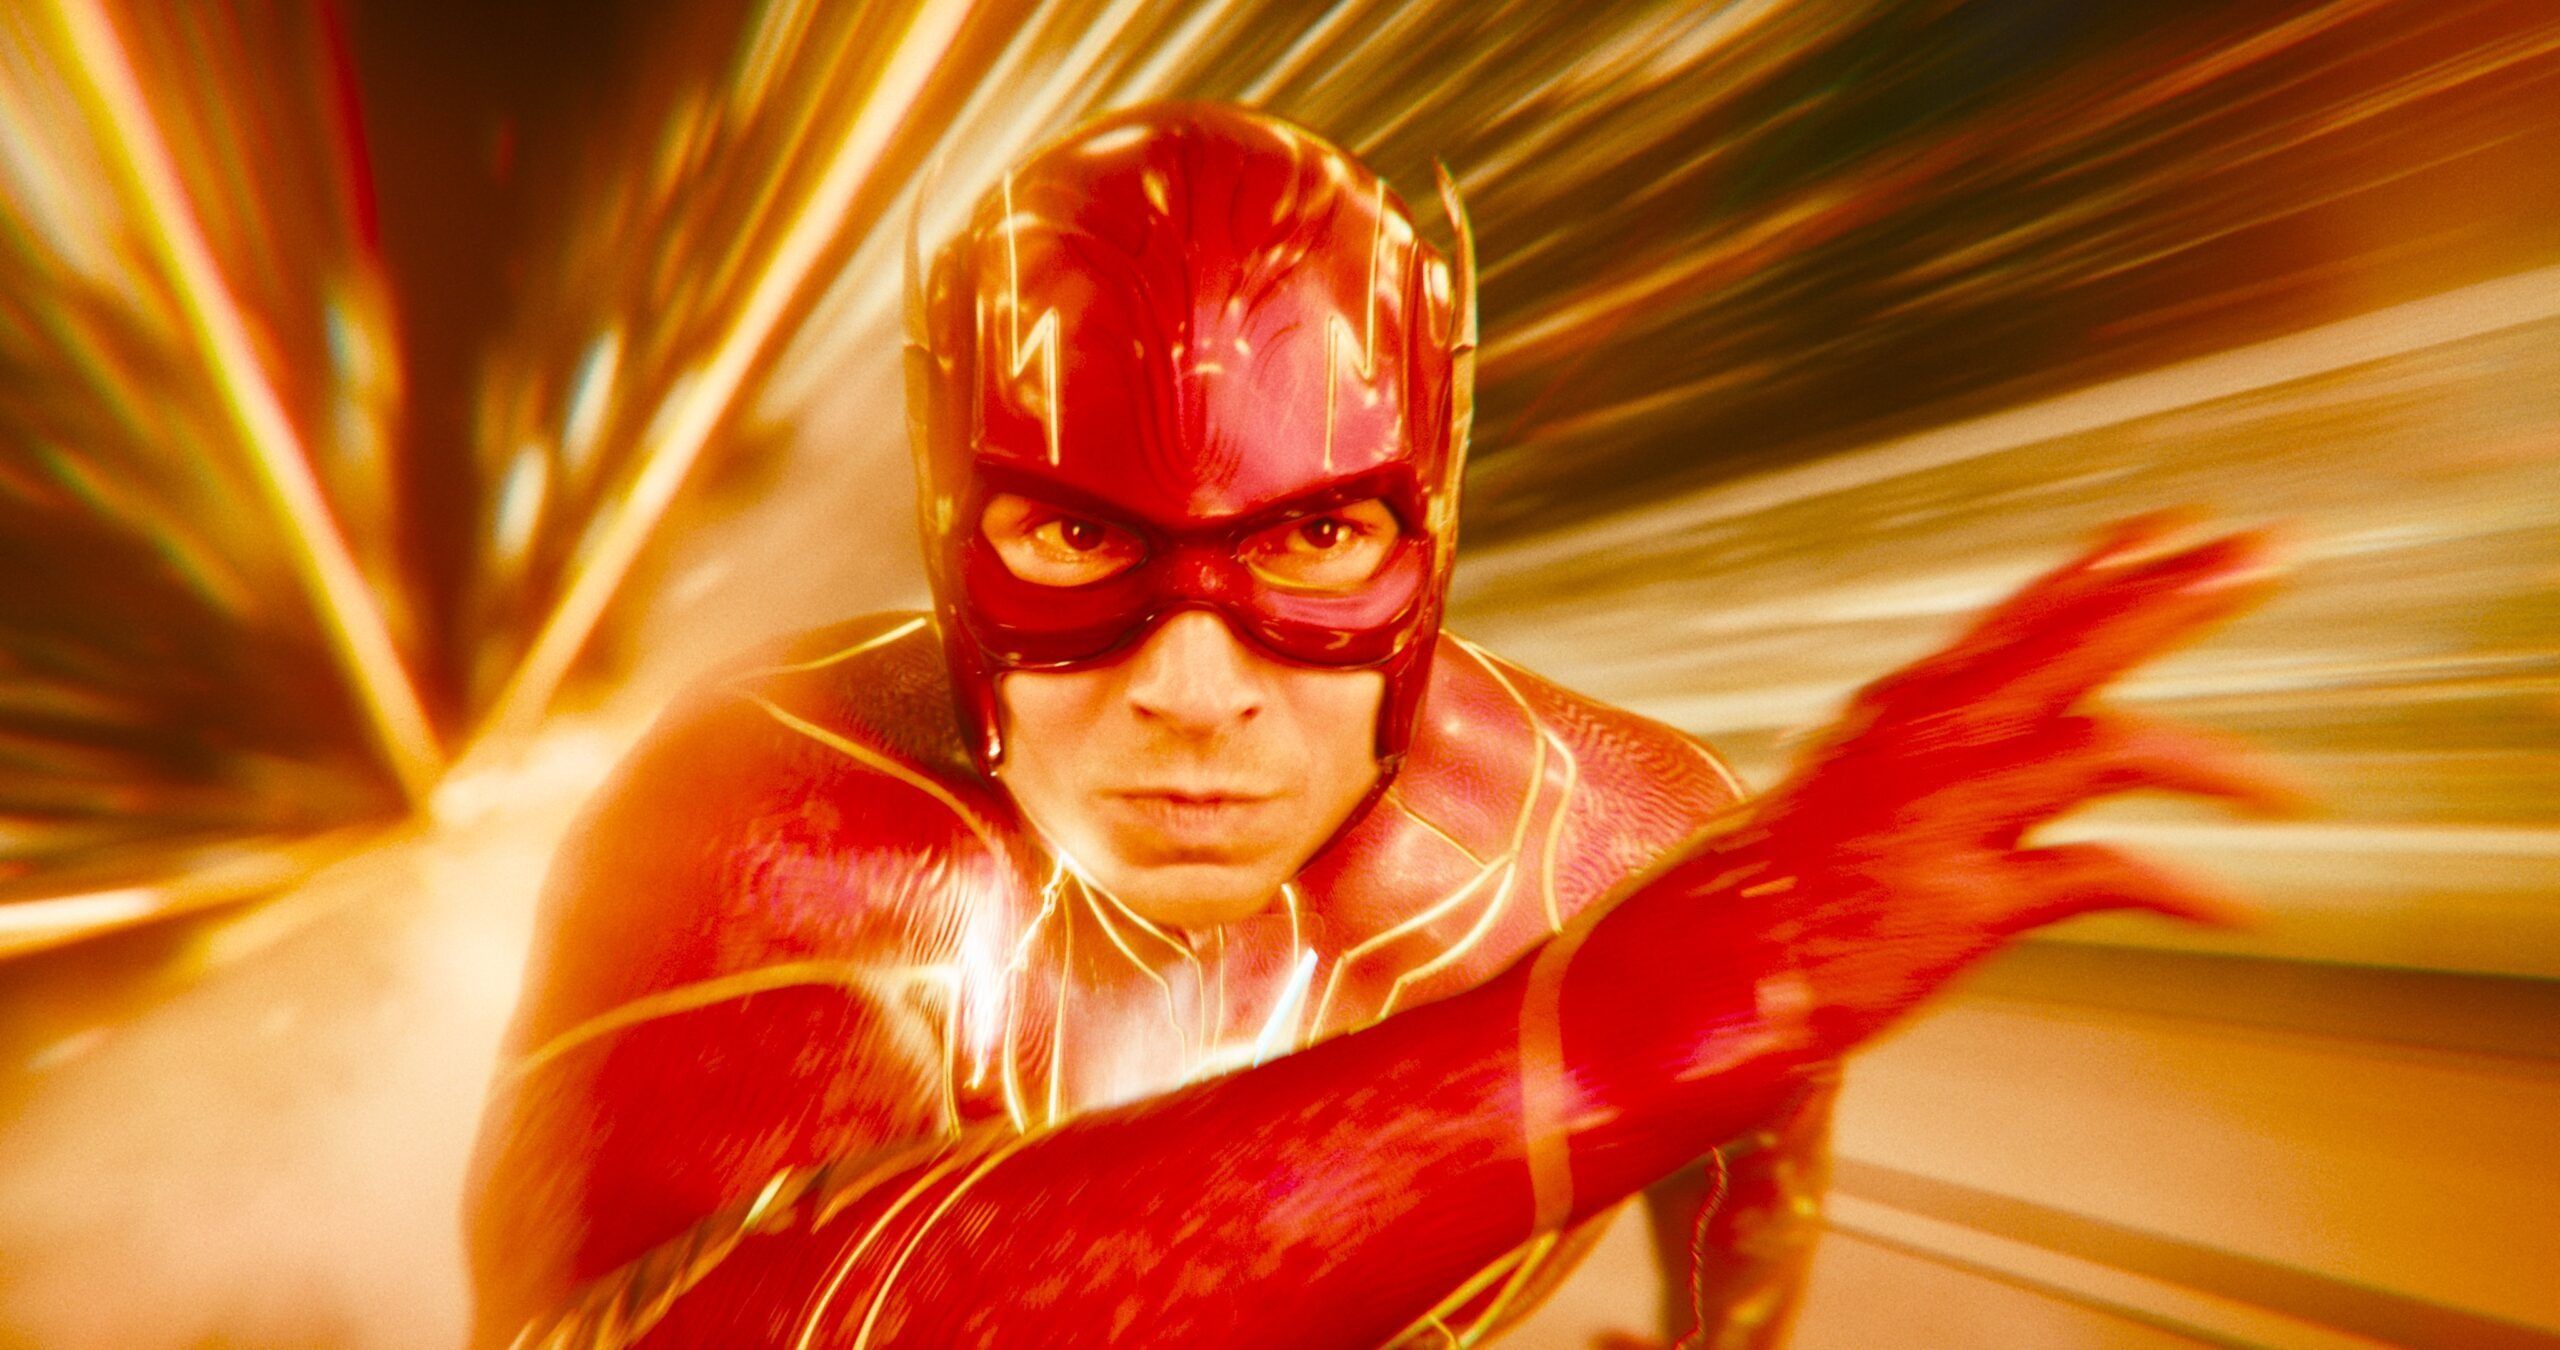 The Flash Movie Ending Explained: What George Clooney Cameo Means